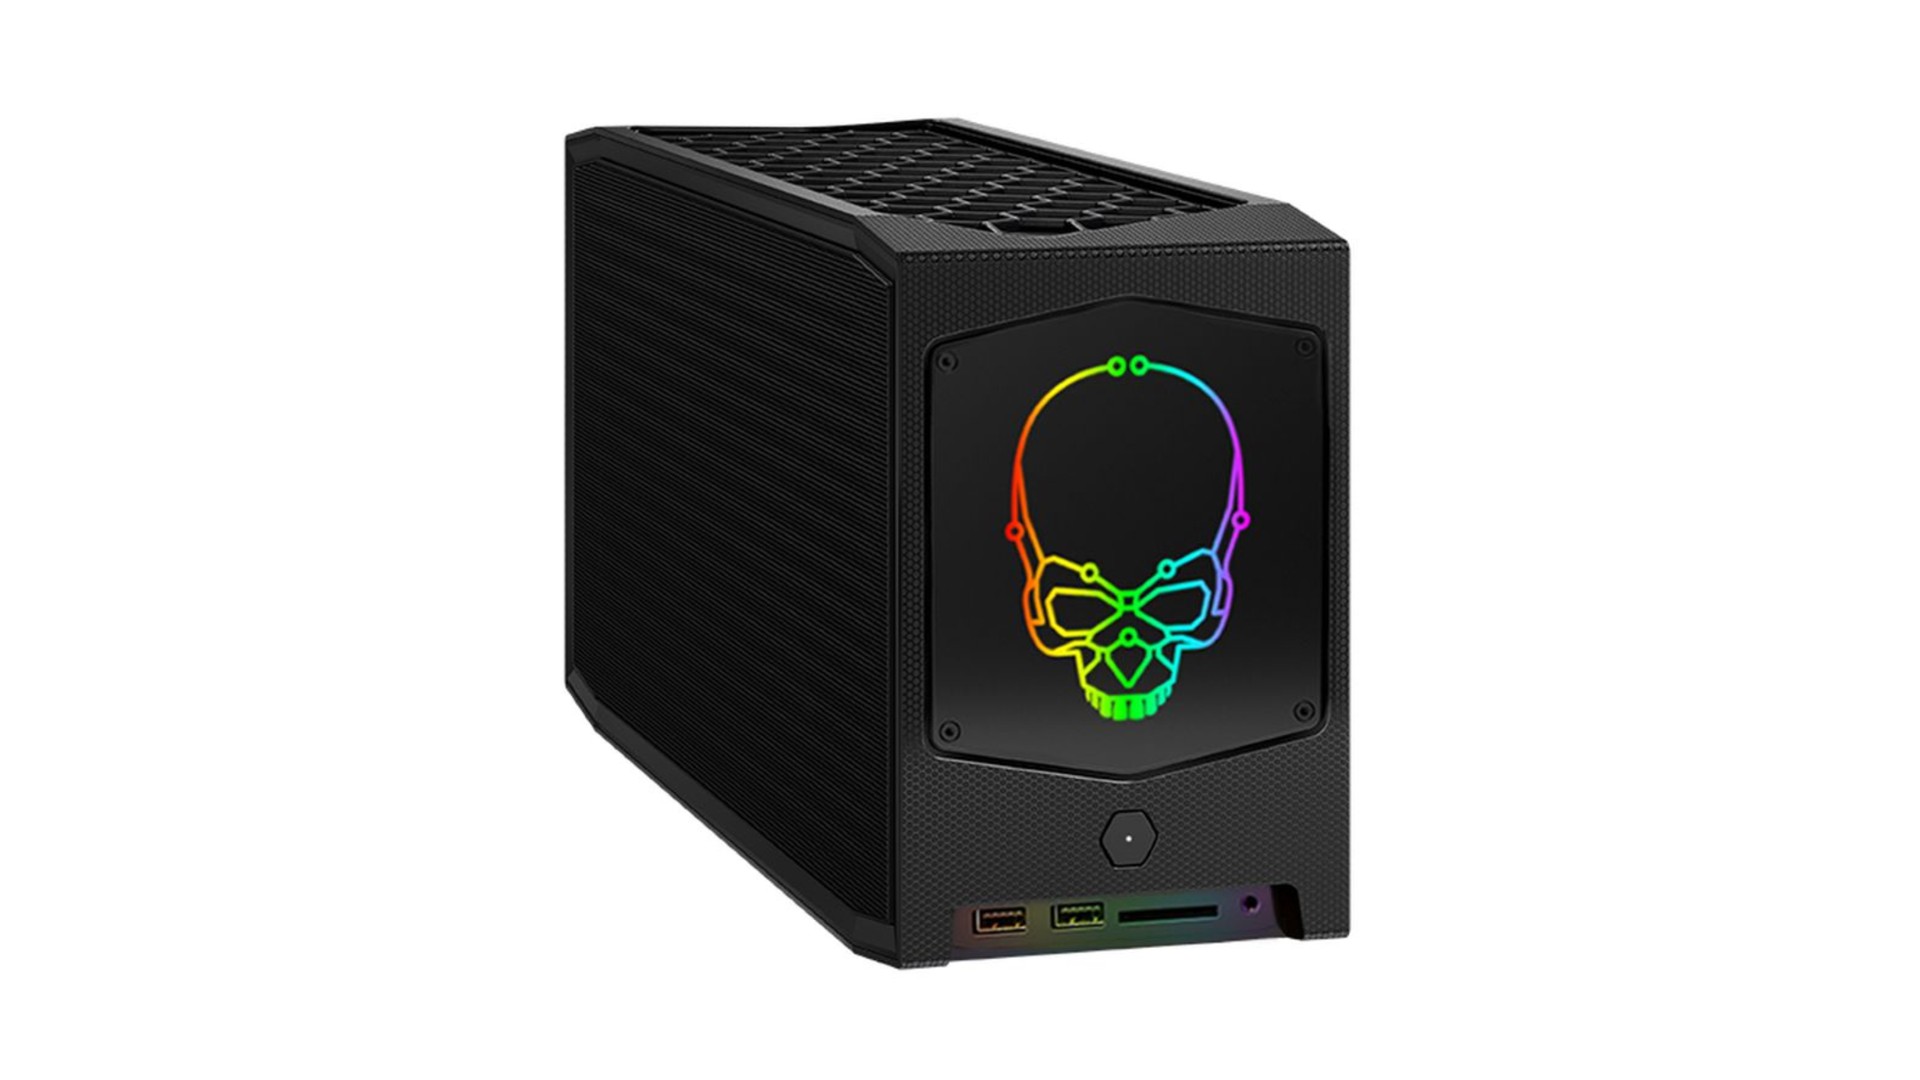 Intel’s new pre-built NUC gaming PC can fit a full-size Nvidia RTX 3080